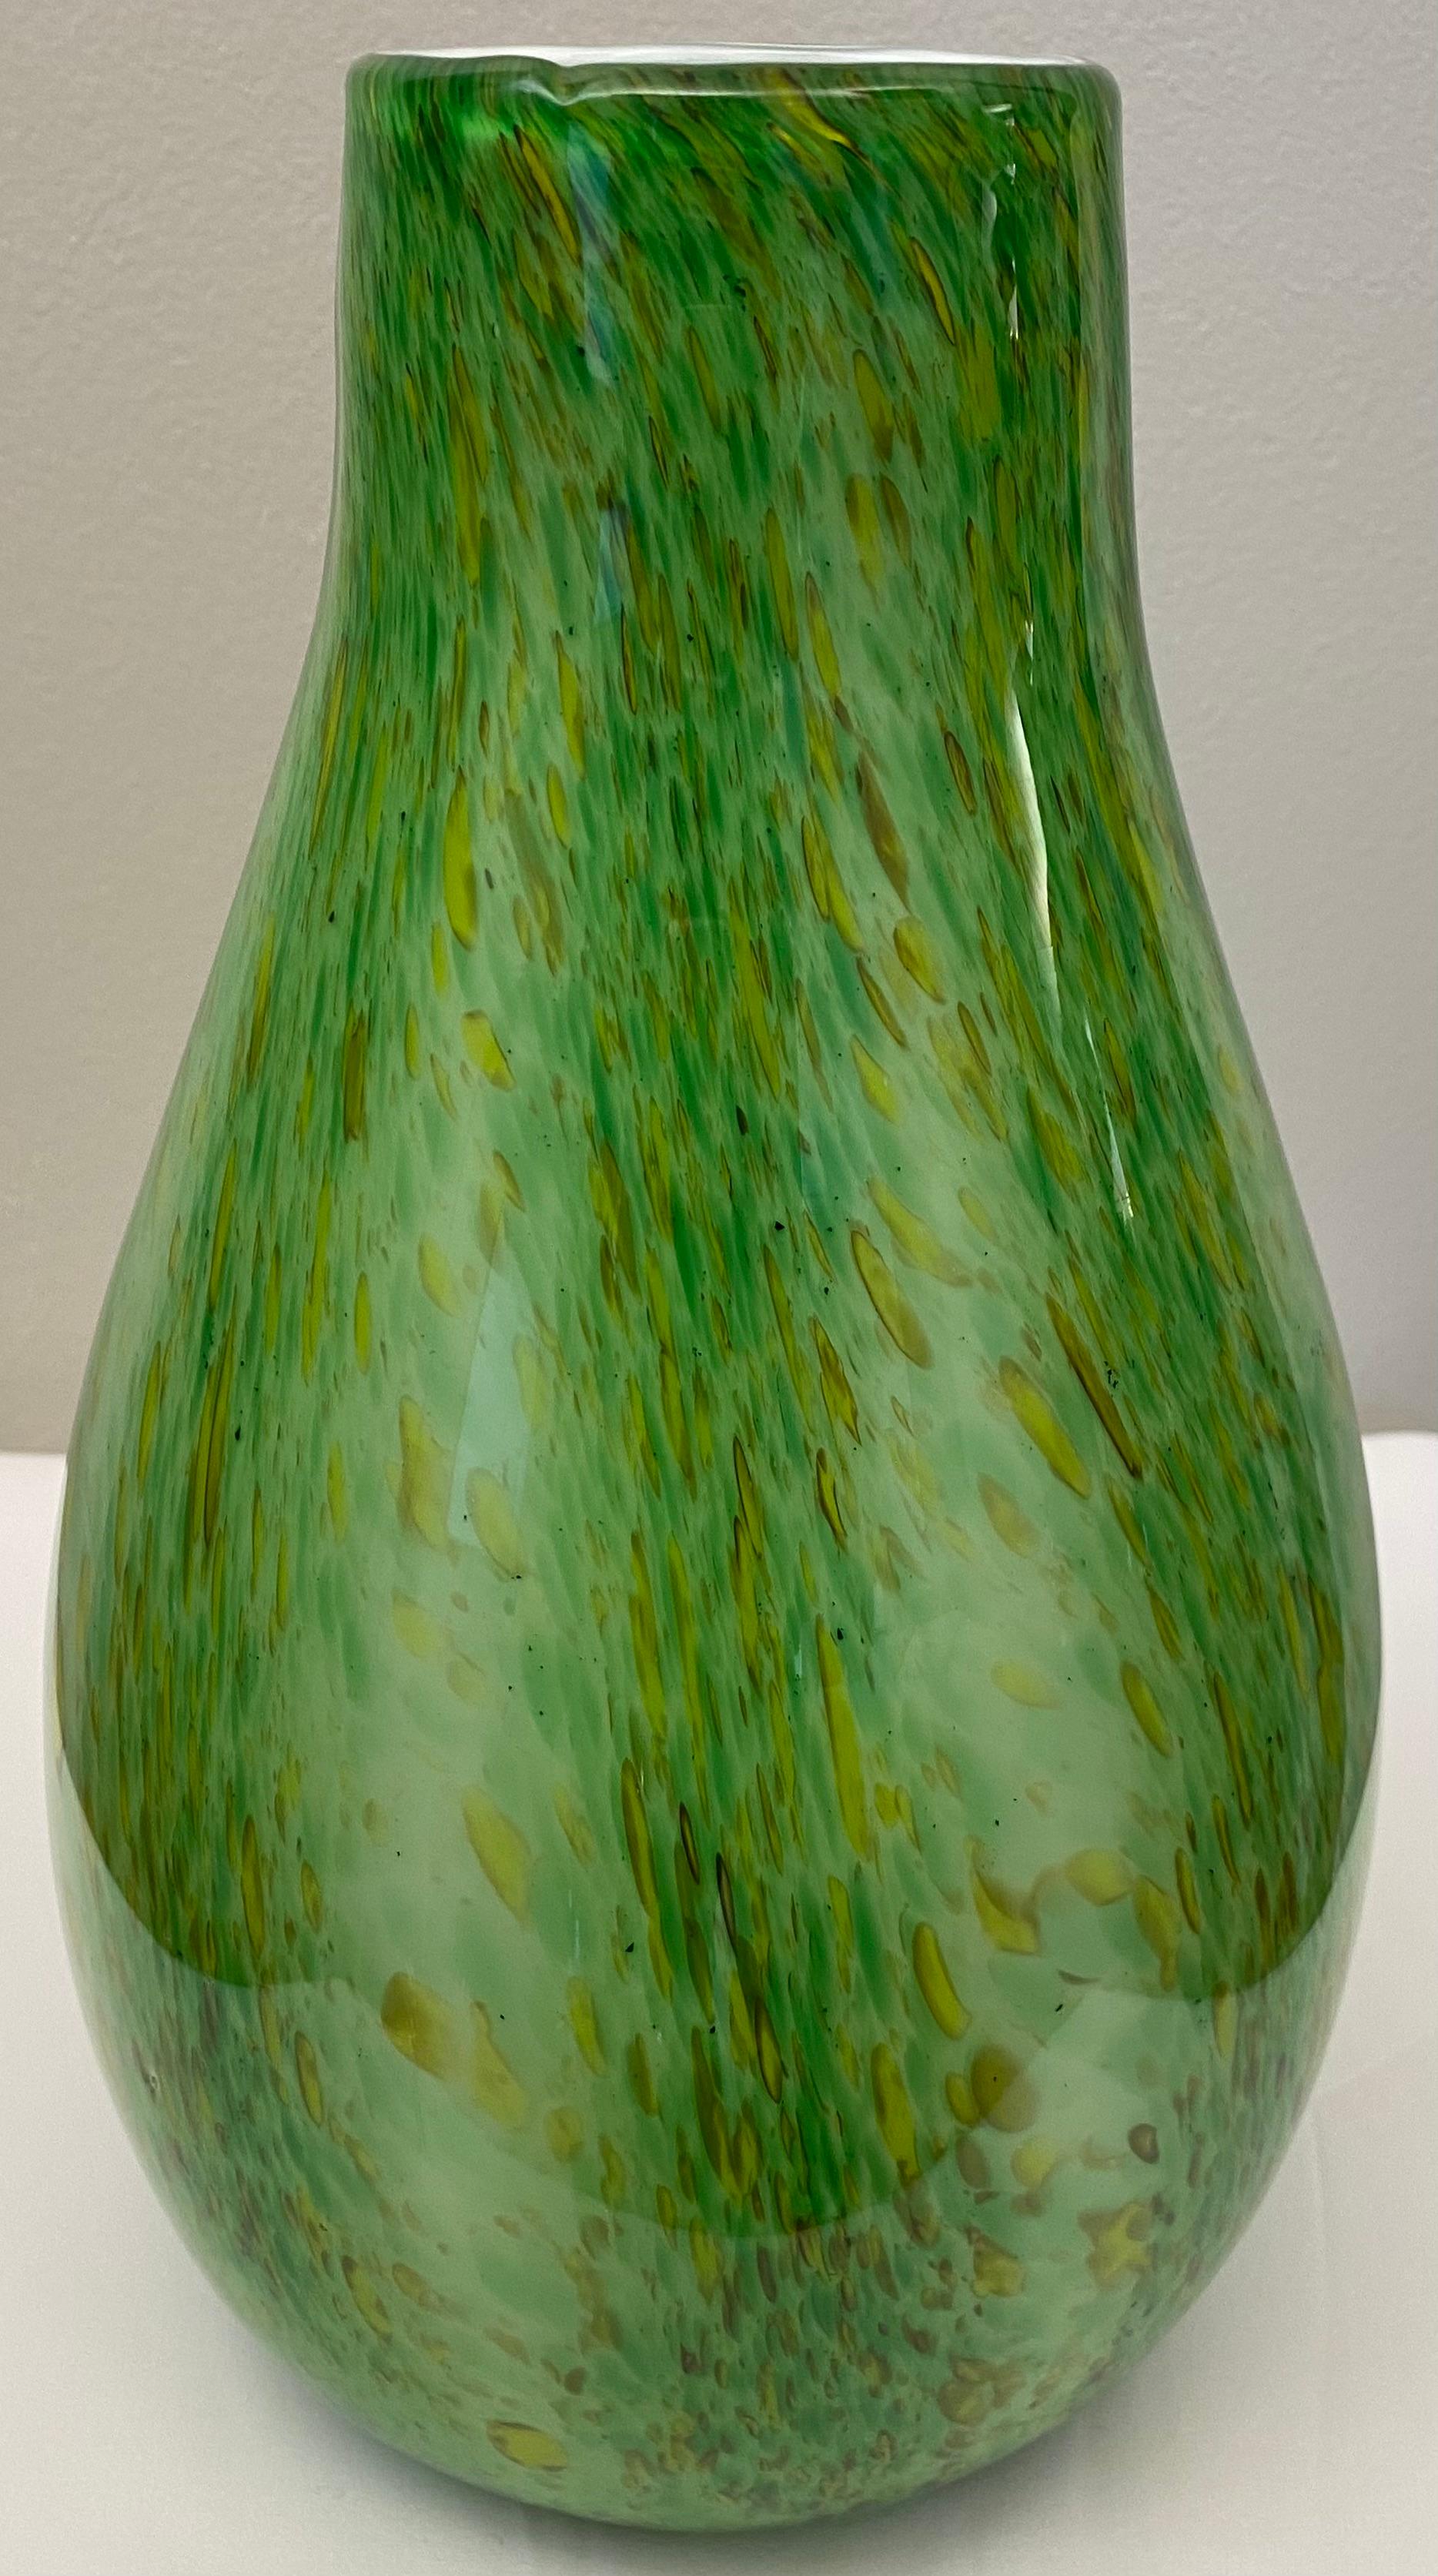 A unique organic modern art glass vase in the manner of designs by Hilton McConnico, blown in the 1990s, that was presumably part of an exclusive collection of unique pieces designed for Formia, Murano.

This lime green and amber vase is executed